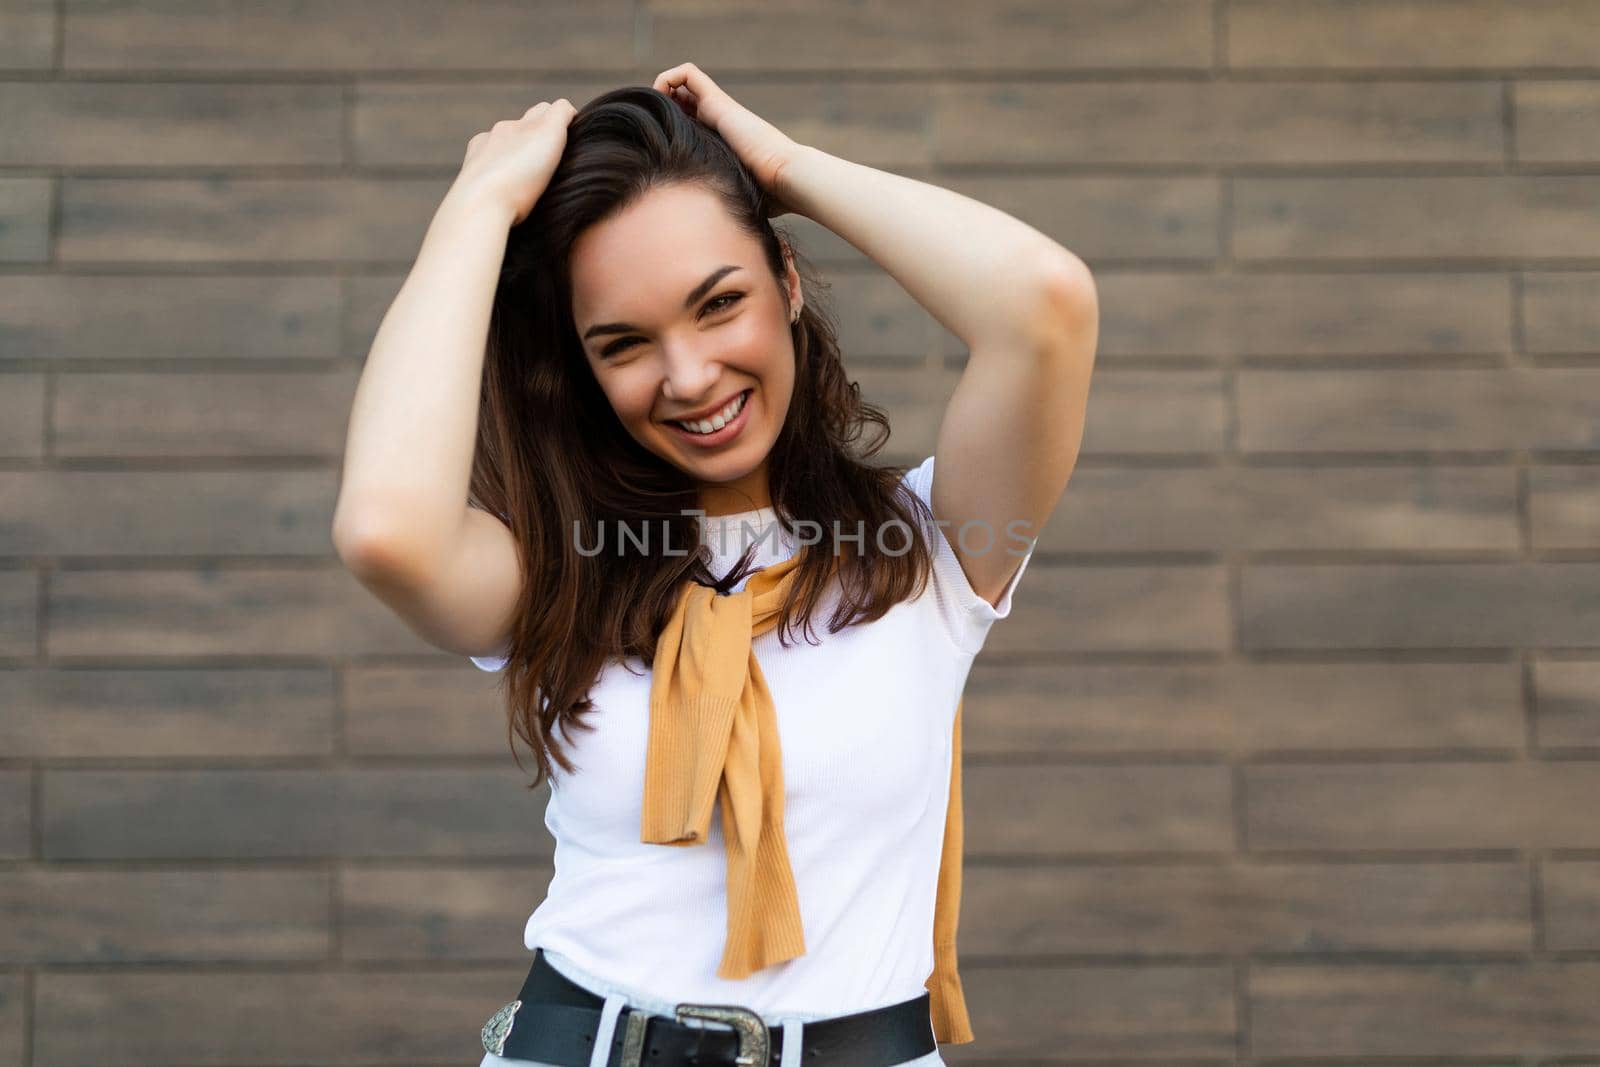 Portrait of successful smiling joyful happy young brunet woman wearing casual white t-shirt and jeans with yellow sweater poising near brown wall in the street and having fun.